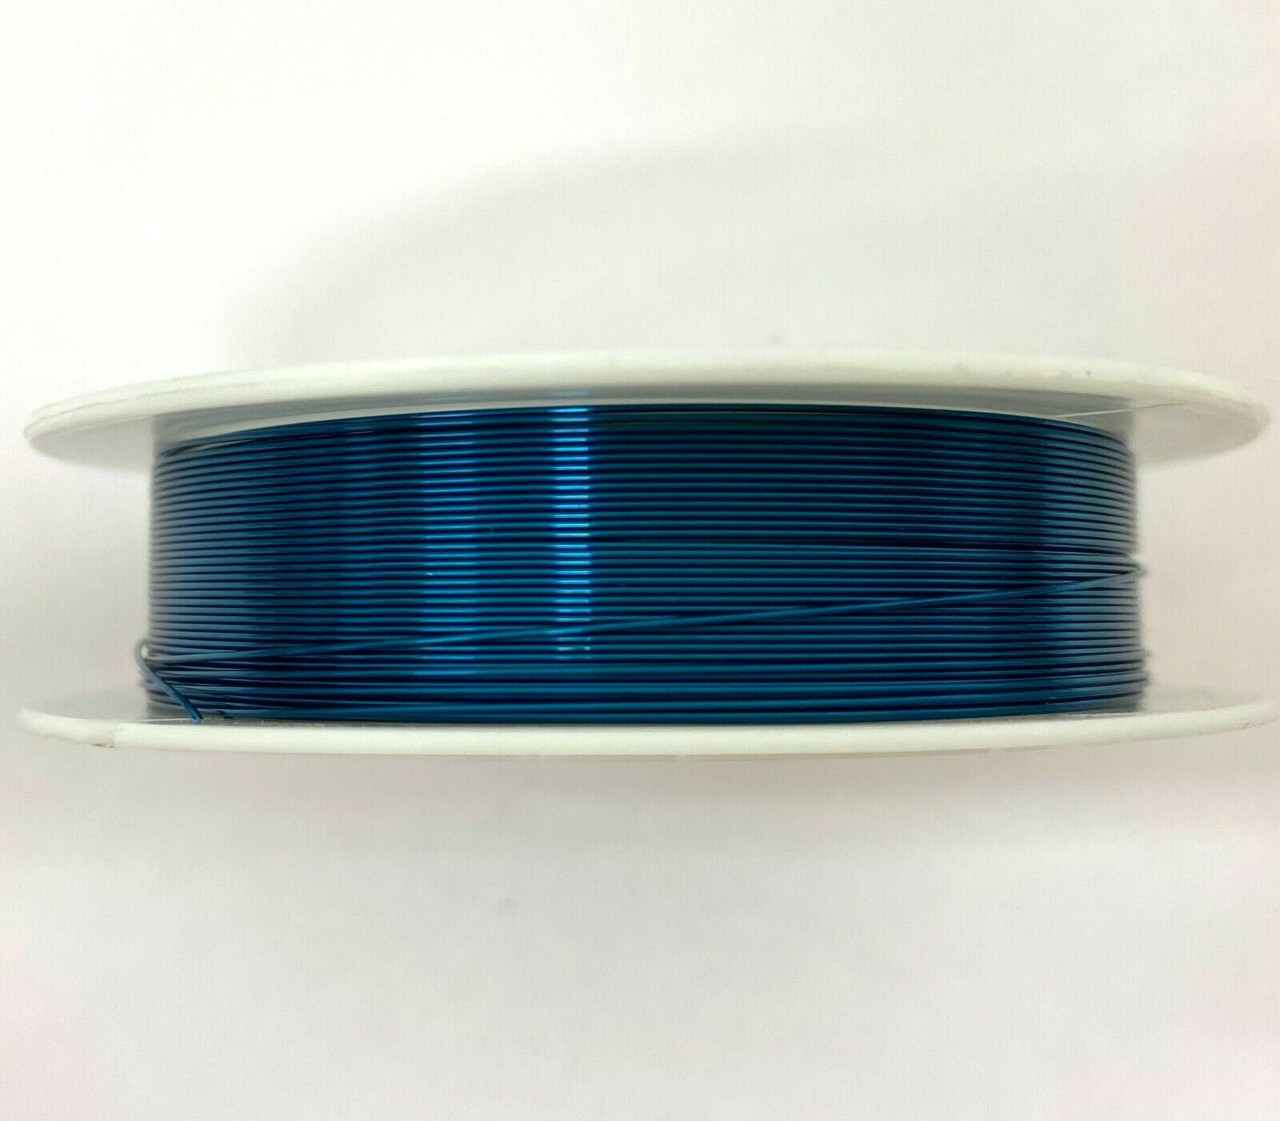 Roll of Copper Wire, 0.8mm thickness, OCEAN BLUE colour, approx 4m length